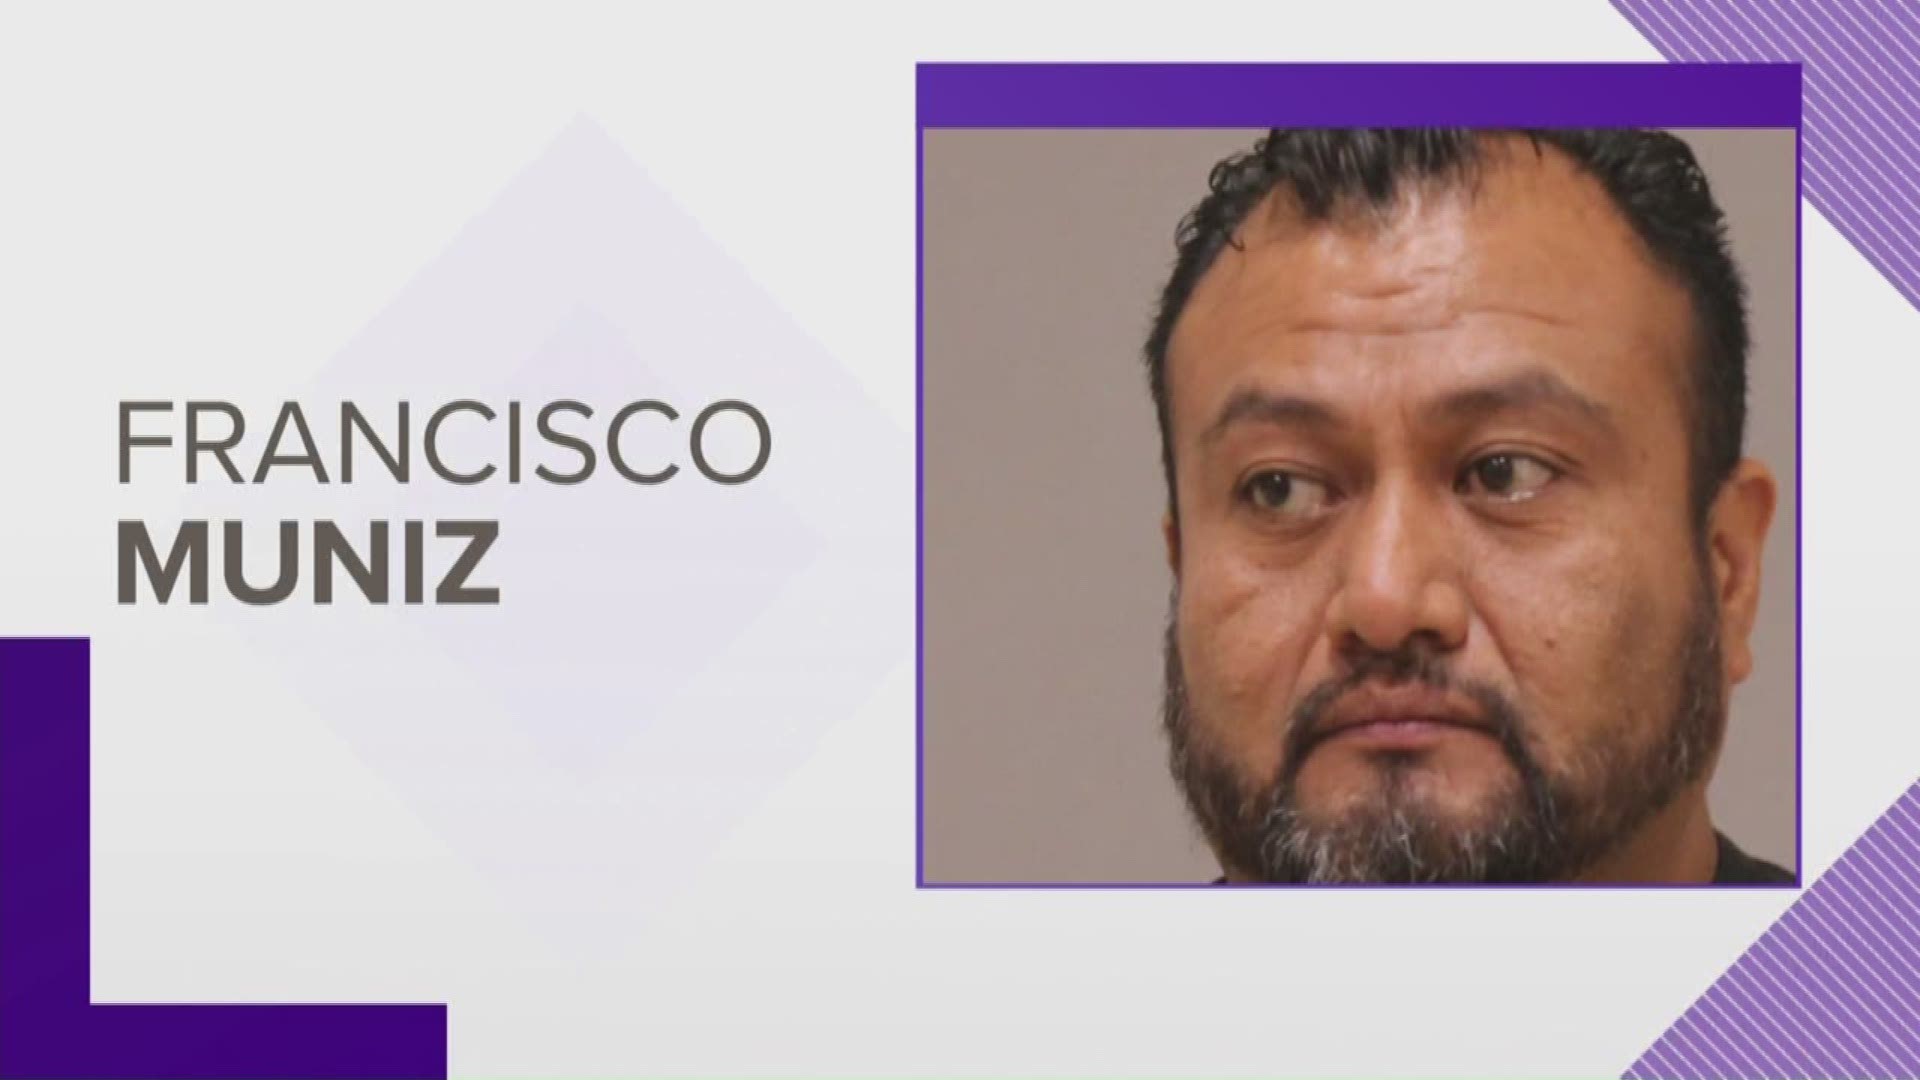 Francisco Muniz admitted to sexually assaulting women patients while working as an X-ray technician at Spectrum Health Blodgett Hospital in East Grand Rapids.